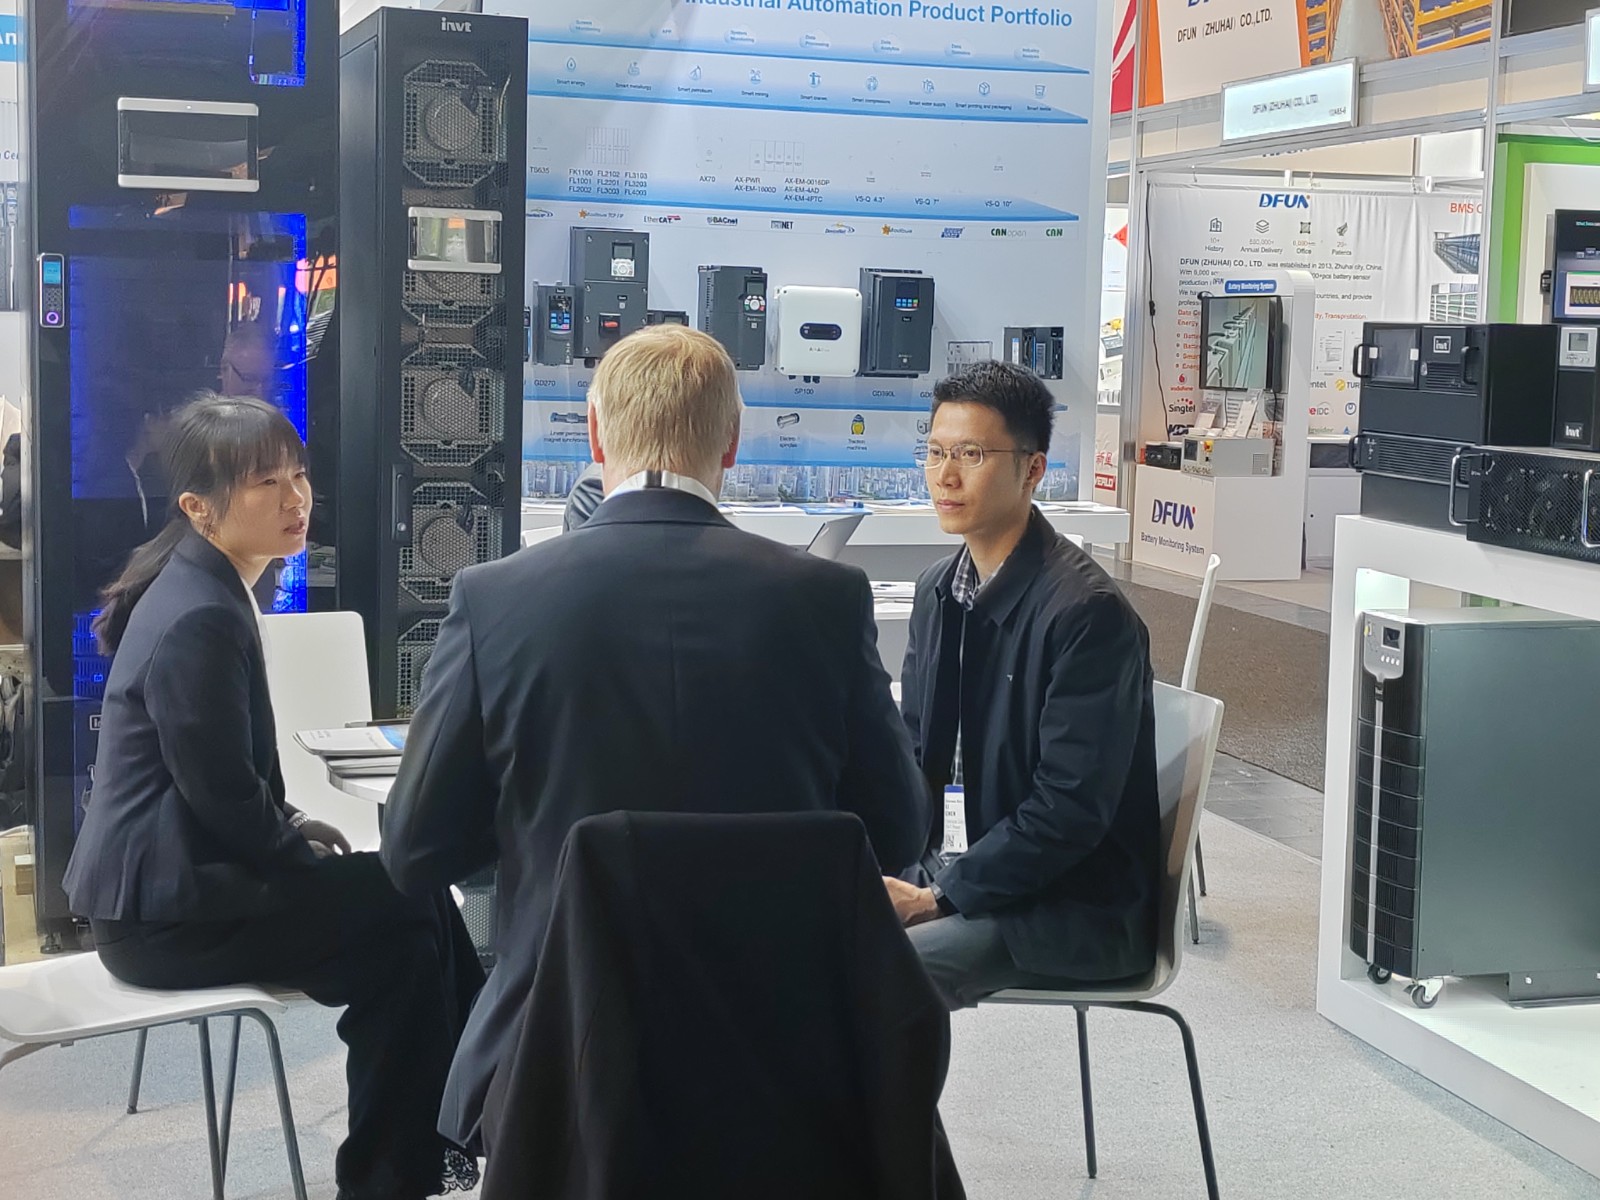 INVT rounds off a successful 5-day at HANNOVER MESSE